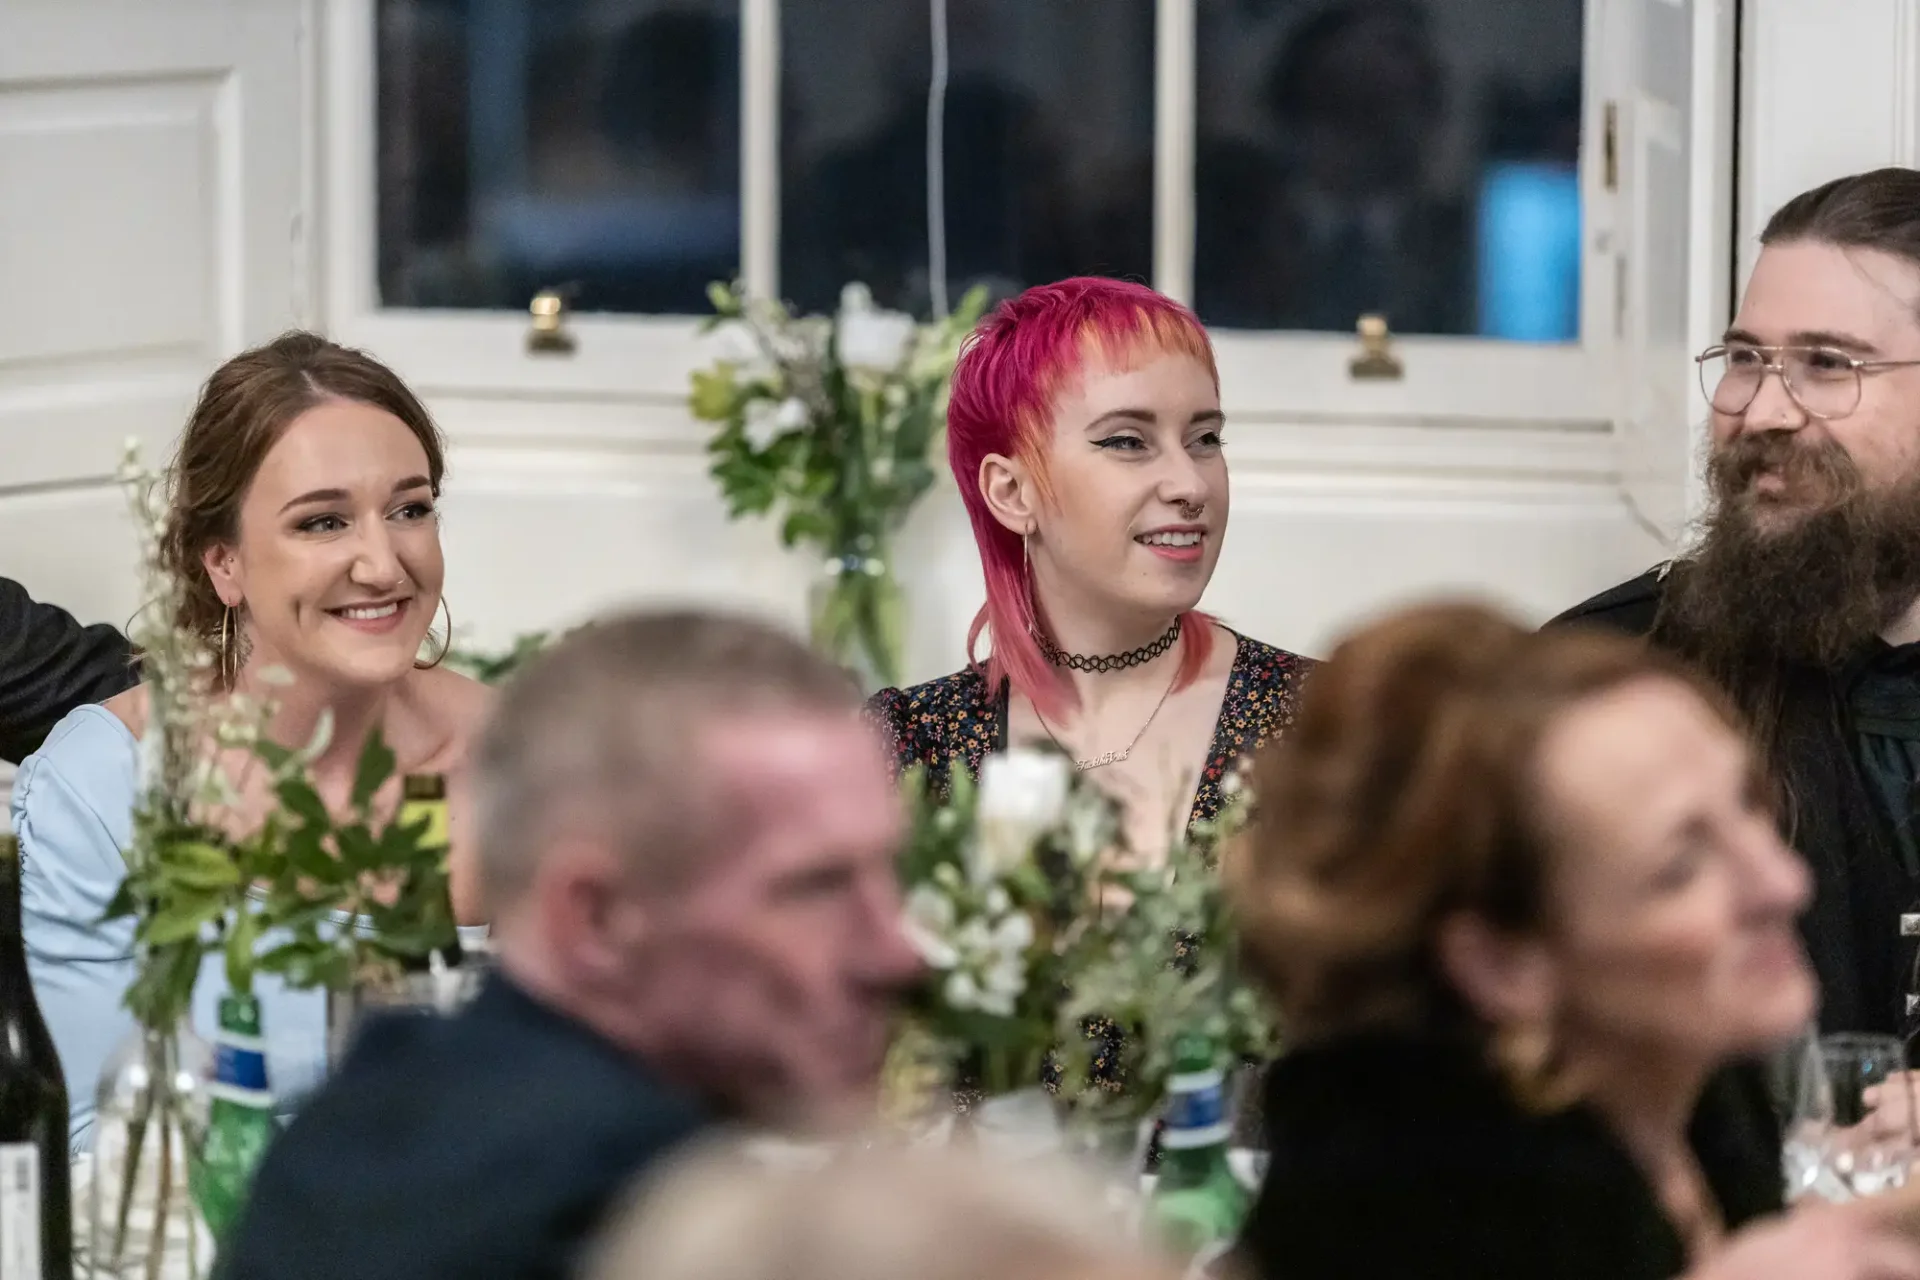 Three people sitting at a dining table during an event, smiling and listening attentively, with a woman in the center sporting bright pink hair.